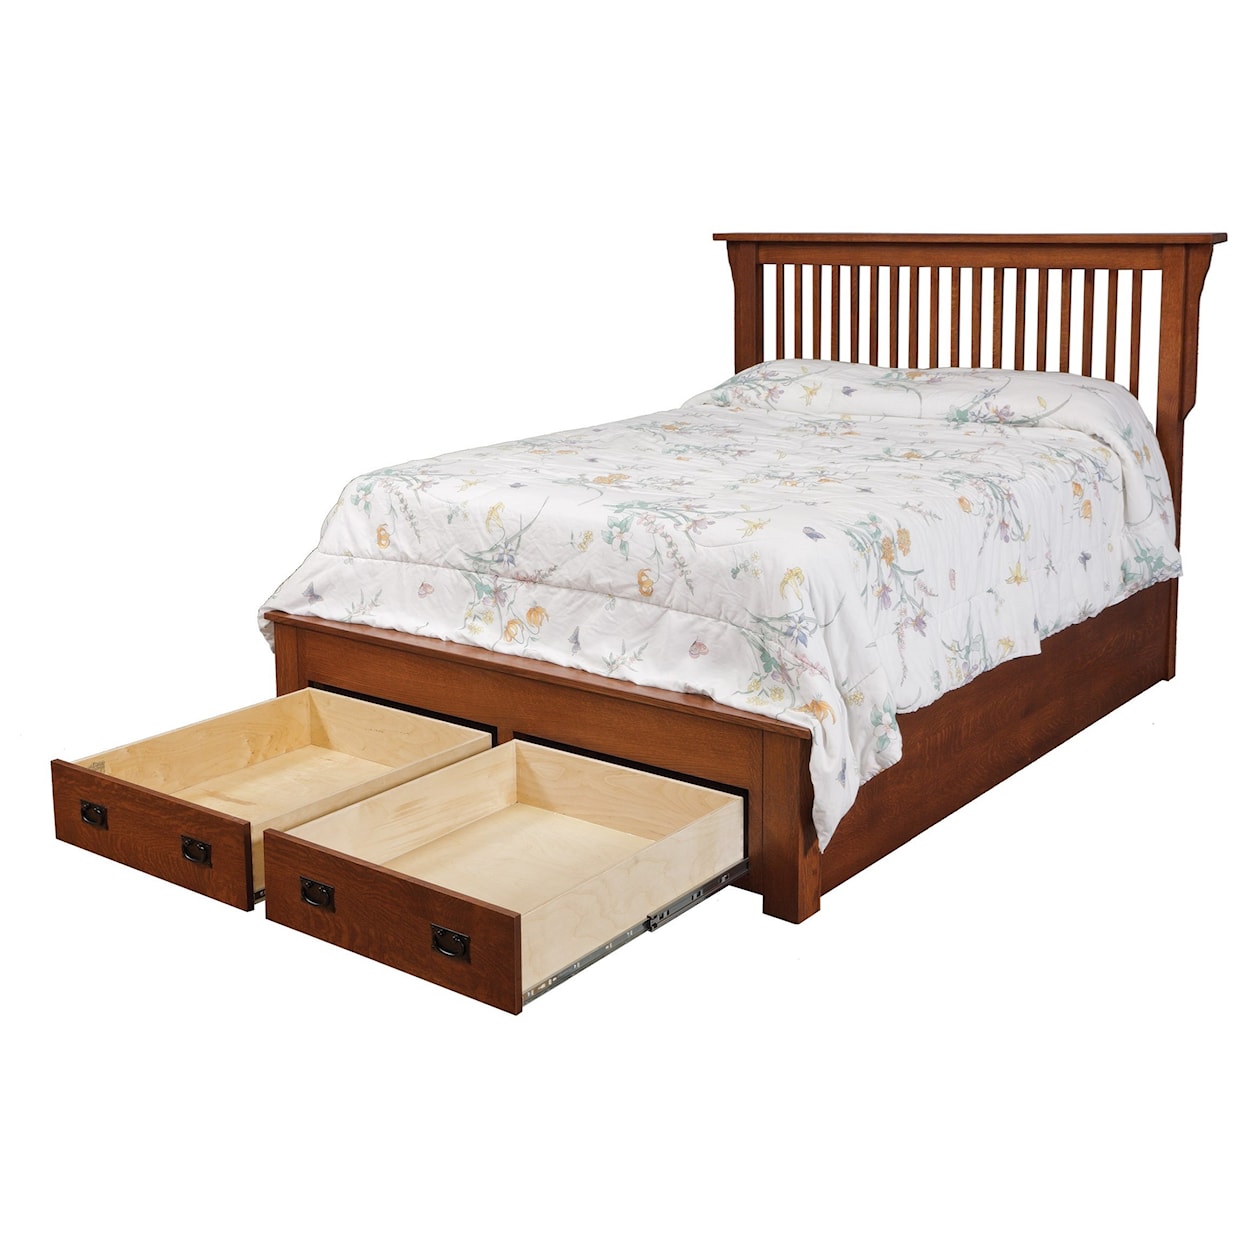 Daniels Amish Mission Queen Storage Bed